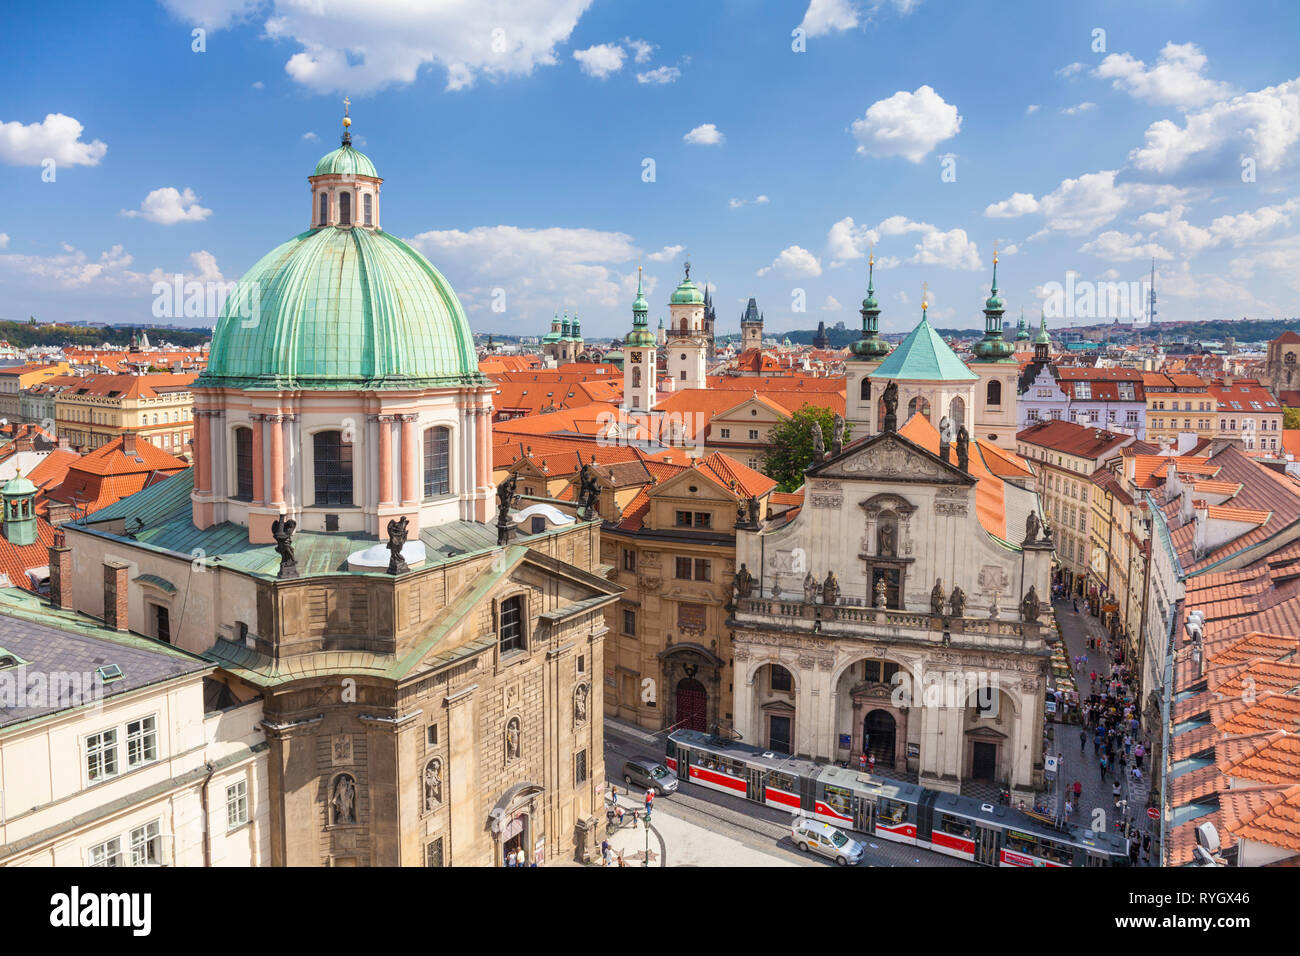 Prague old town Staré Město St. Francis Of Assisi Church Rooftop spires and towers of churches and old baroque buildings Prague Czech Republic EUrope Stock Photo